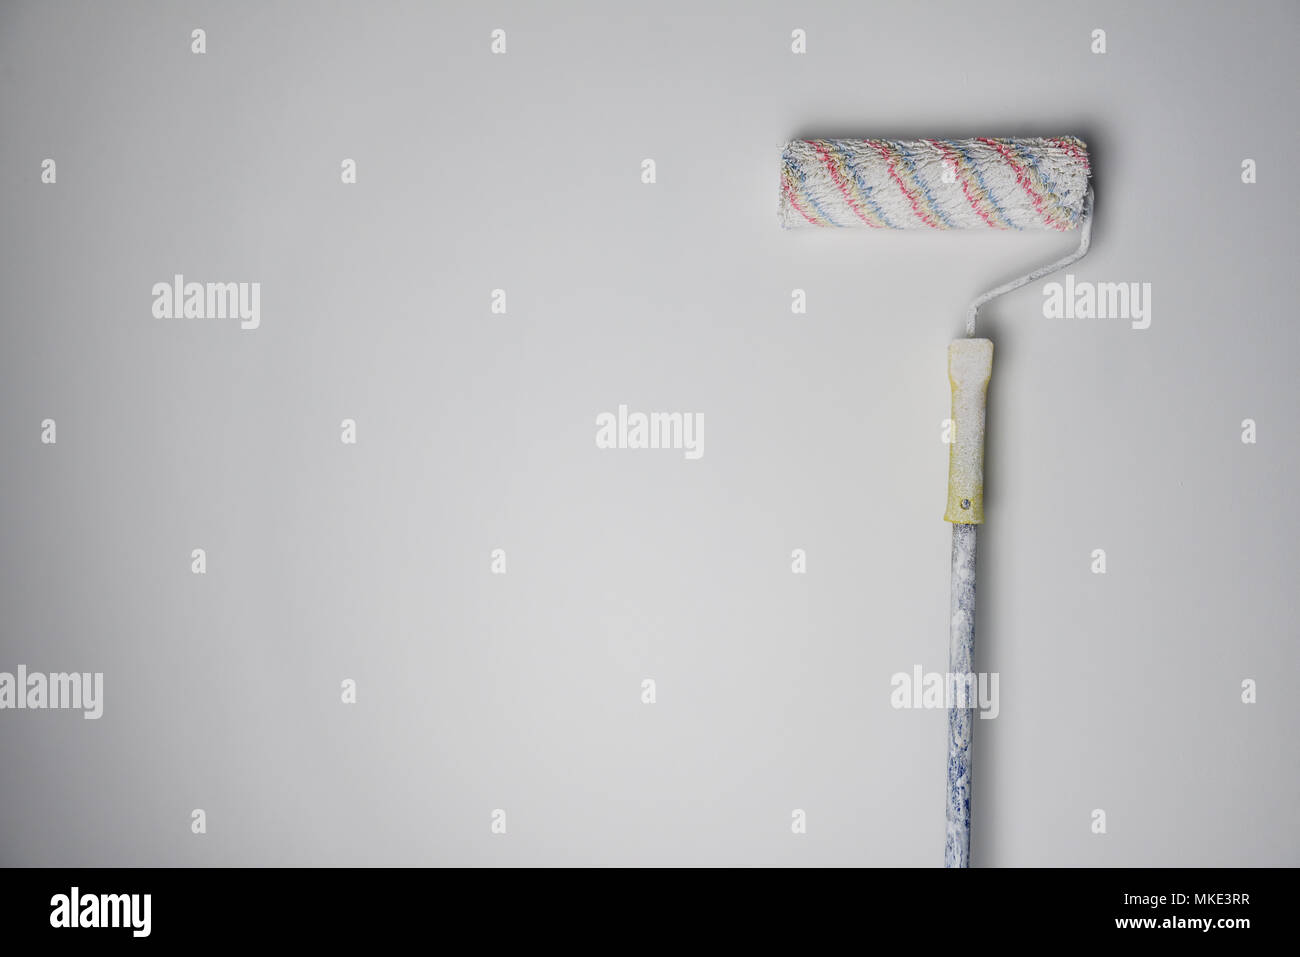 Painting roller on white wall background Stock Photo